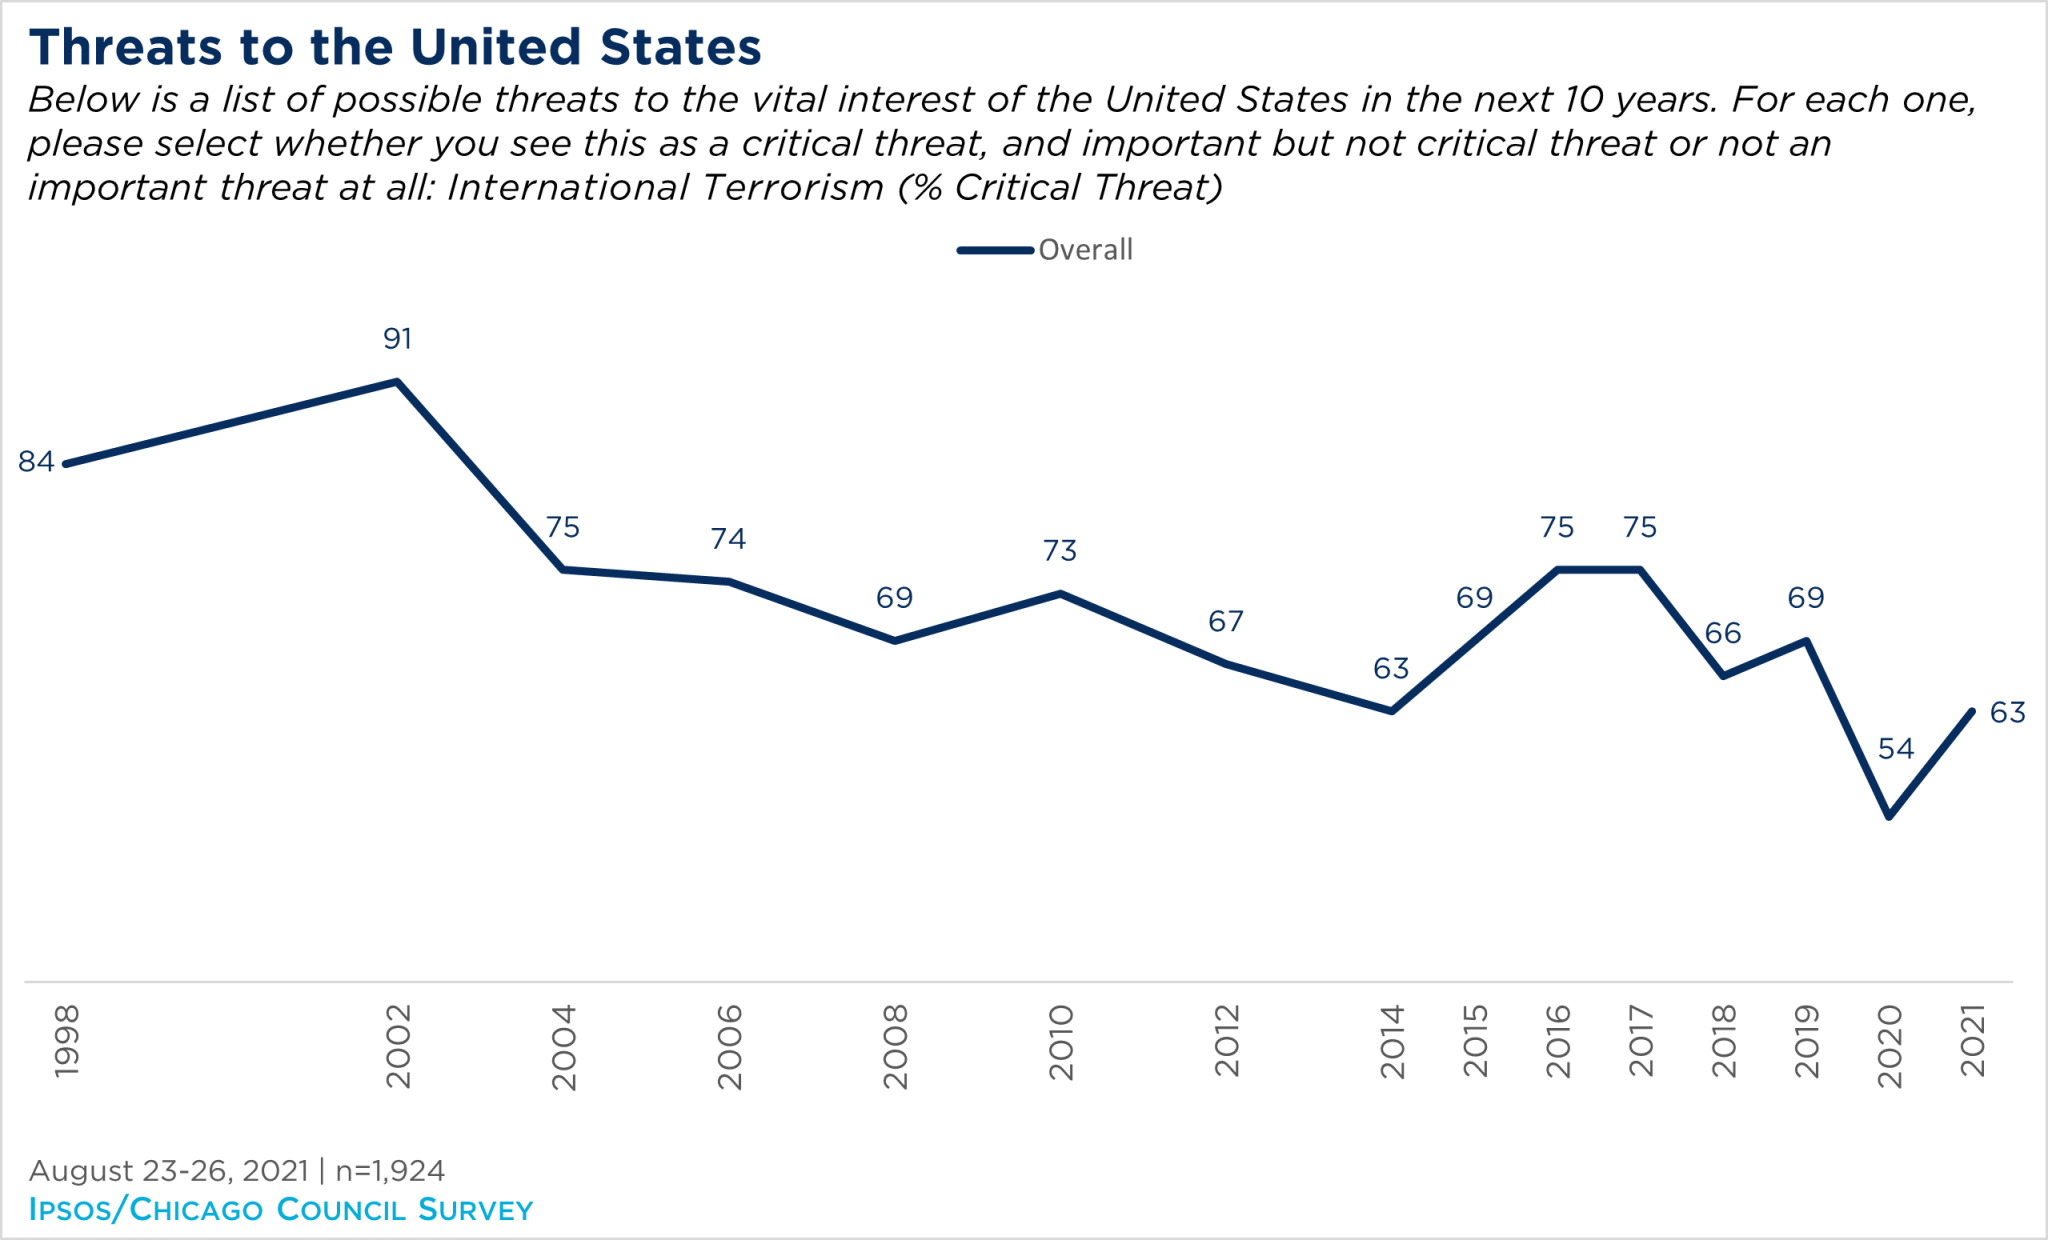 Perceived threats to the United States polling figure.